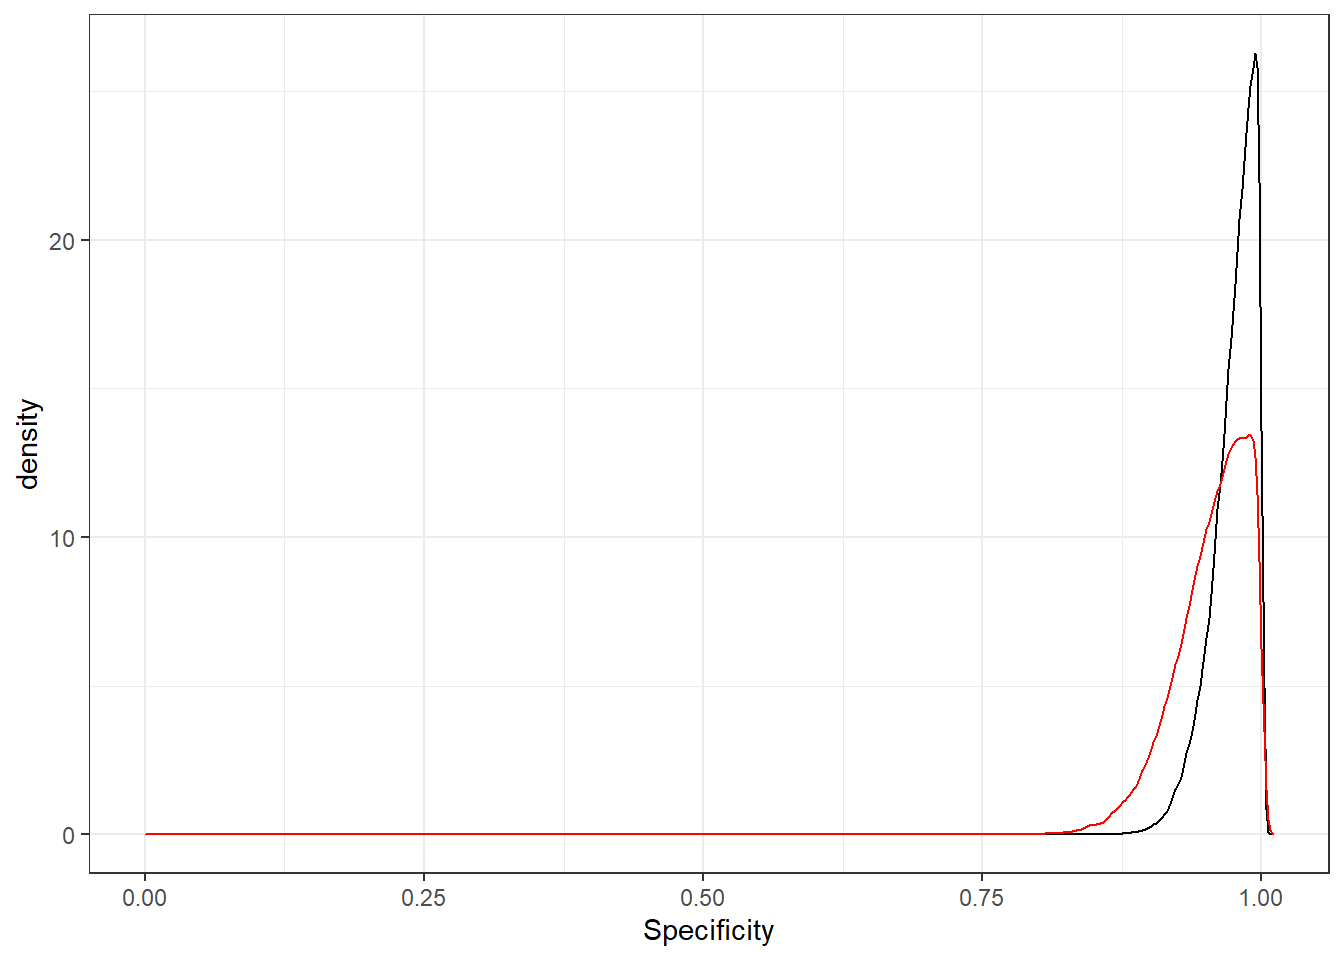 Posterior distributions for PAG specificity at 28-35 days (black) and 36-45 days (red) post-breeding.